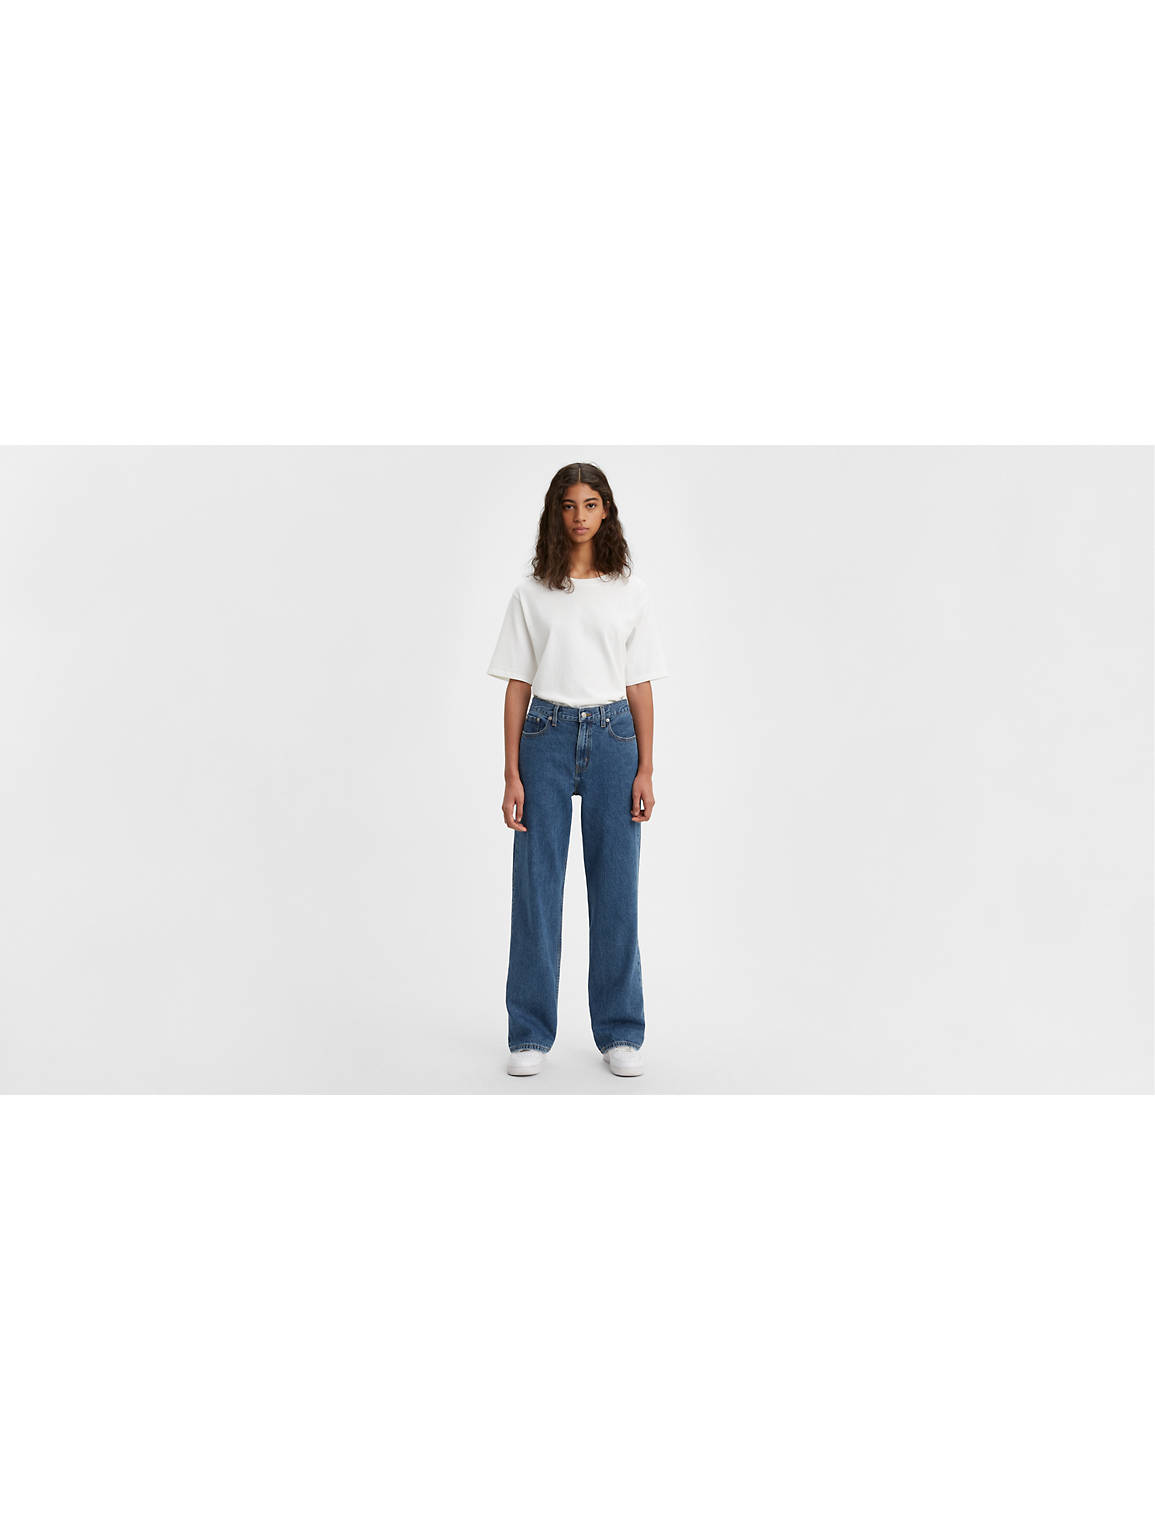 Loose Jeans, That Look Good On Everybody By Hug for Trends